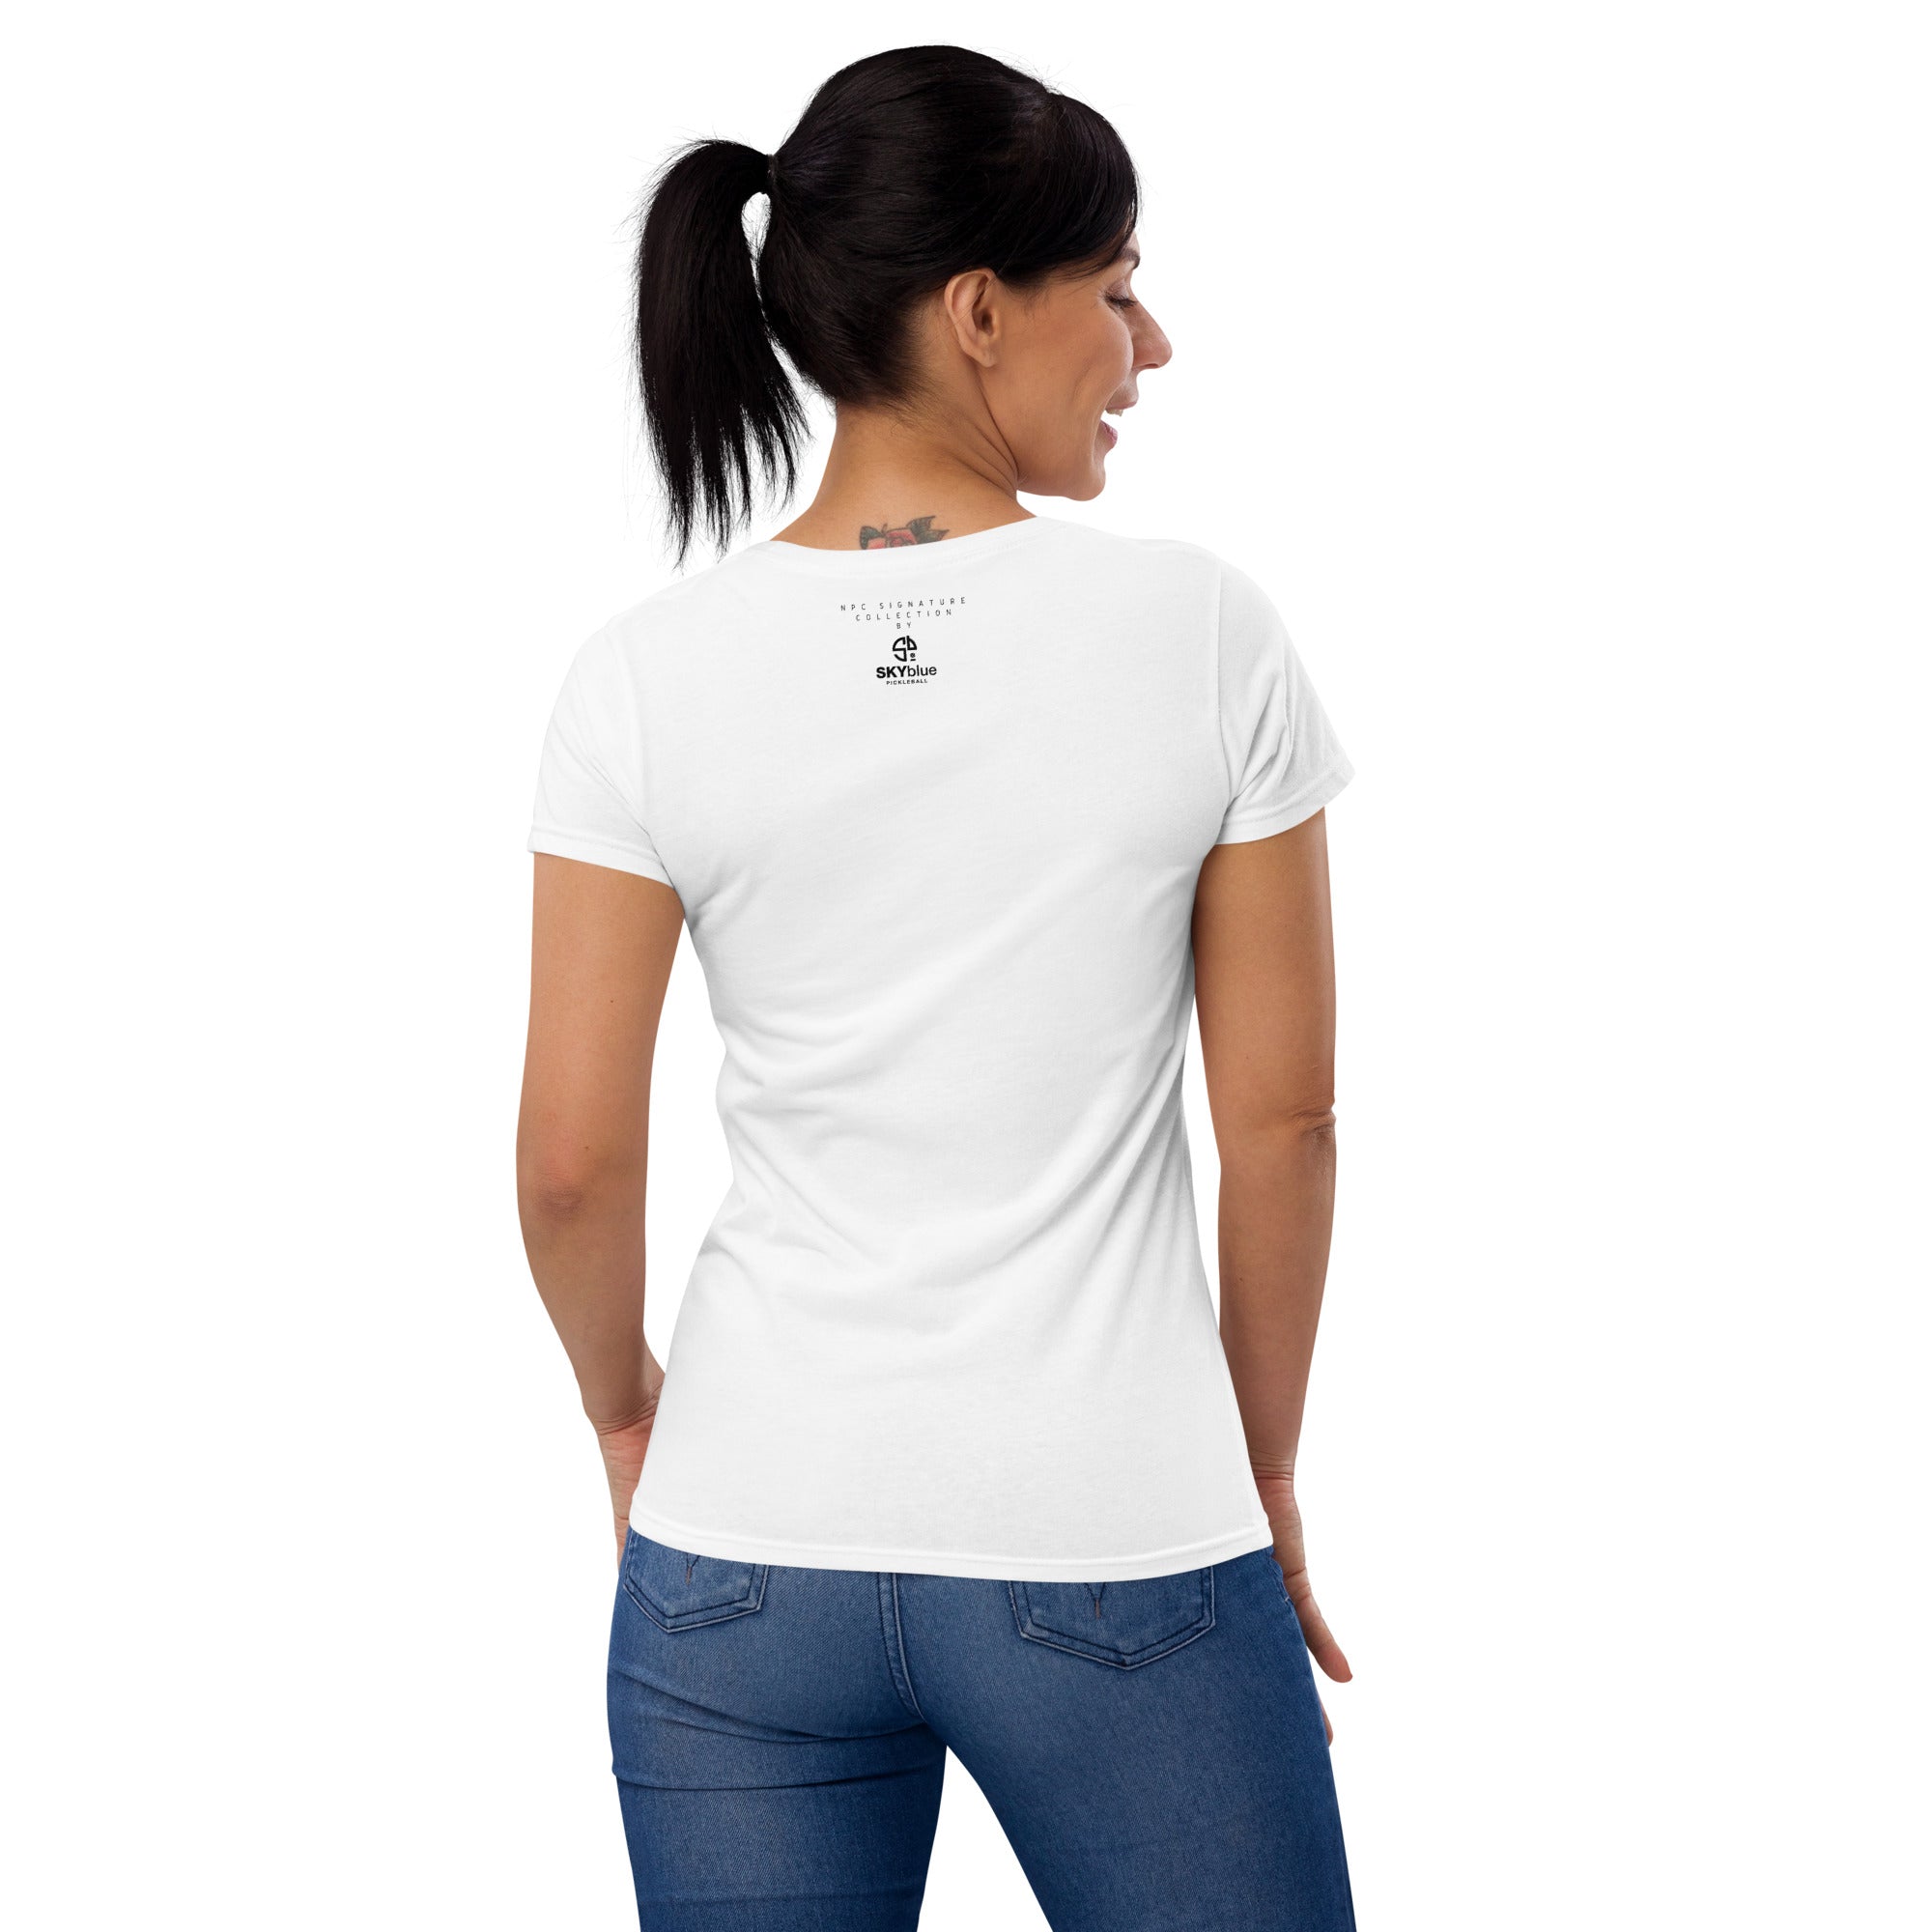 NPC Signature Collection "The United Nations of Pickleball Women™ !" Women's short sleeve cotton t-shirt